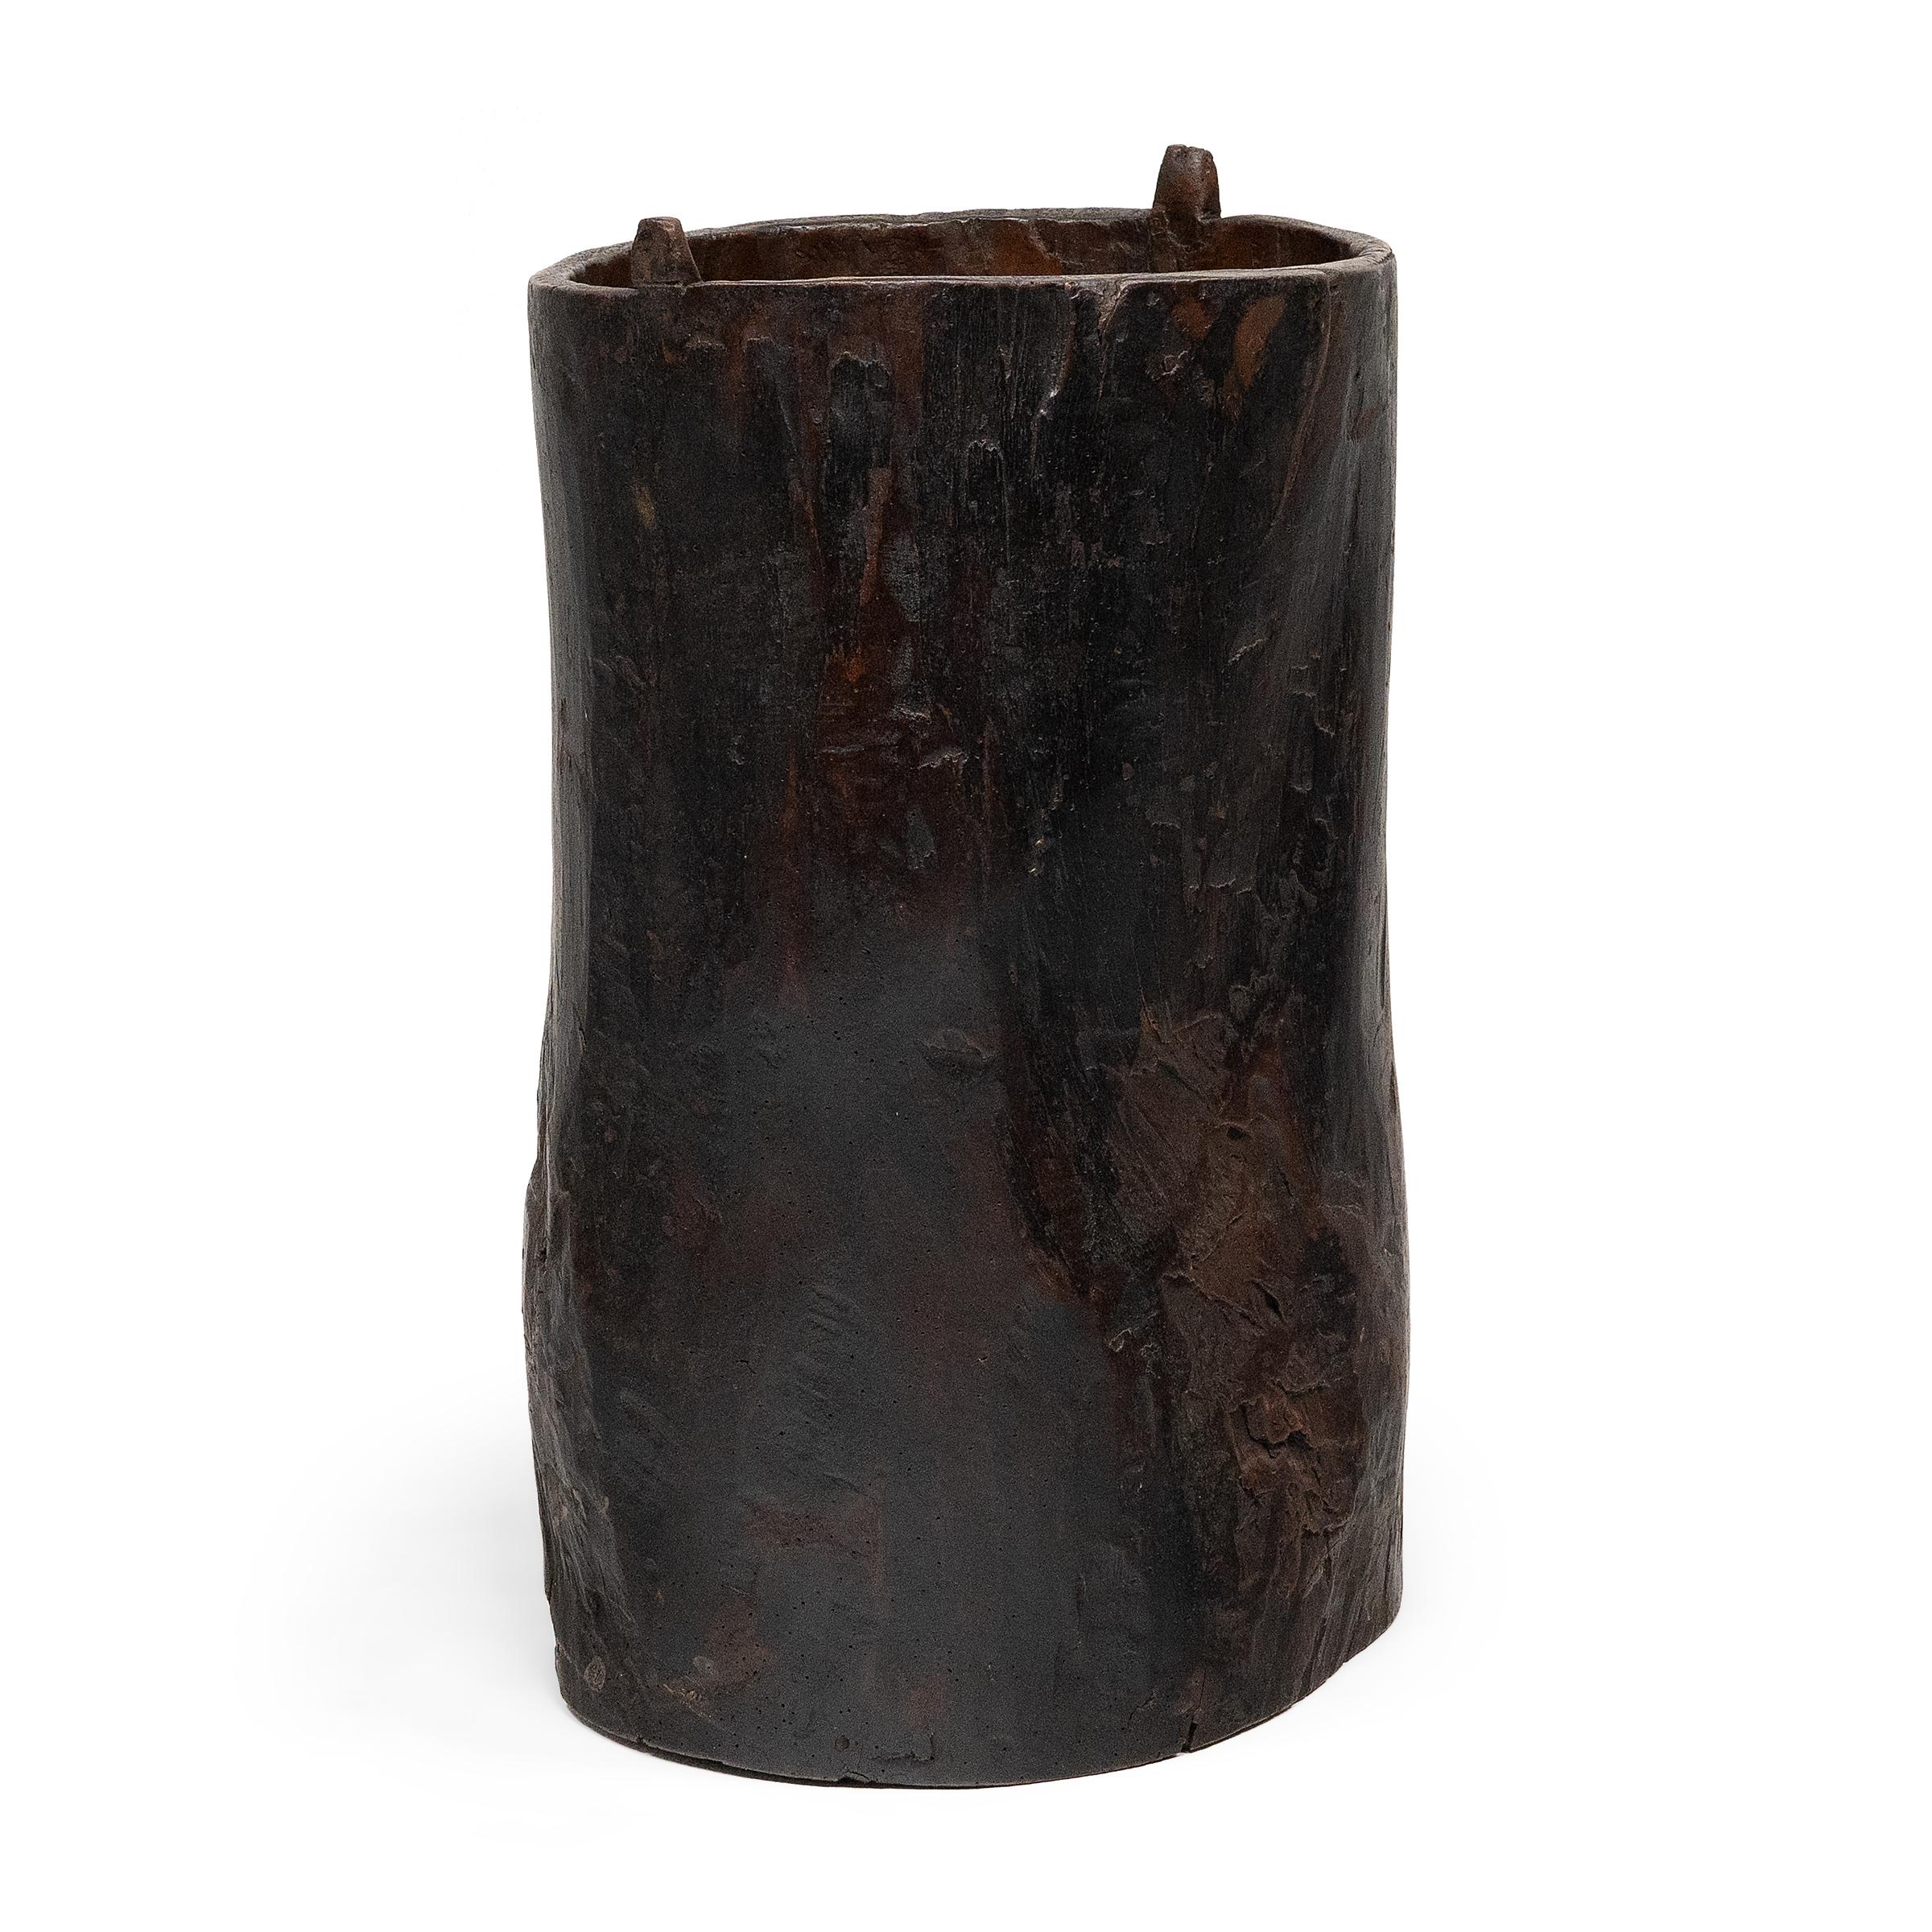 This hand-crafted wooden container dates to the mid-19th century and was likely used to store various foods or household items. Darkened by a rich patina, the container is elegantly constructed from a single block of wood with a beautifully active